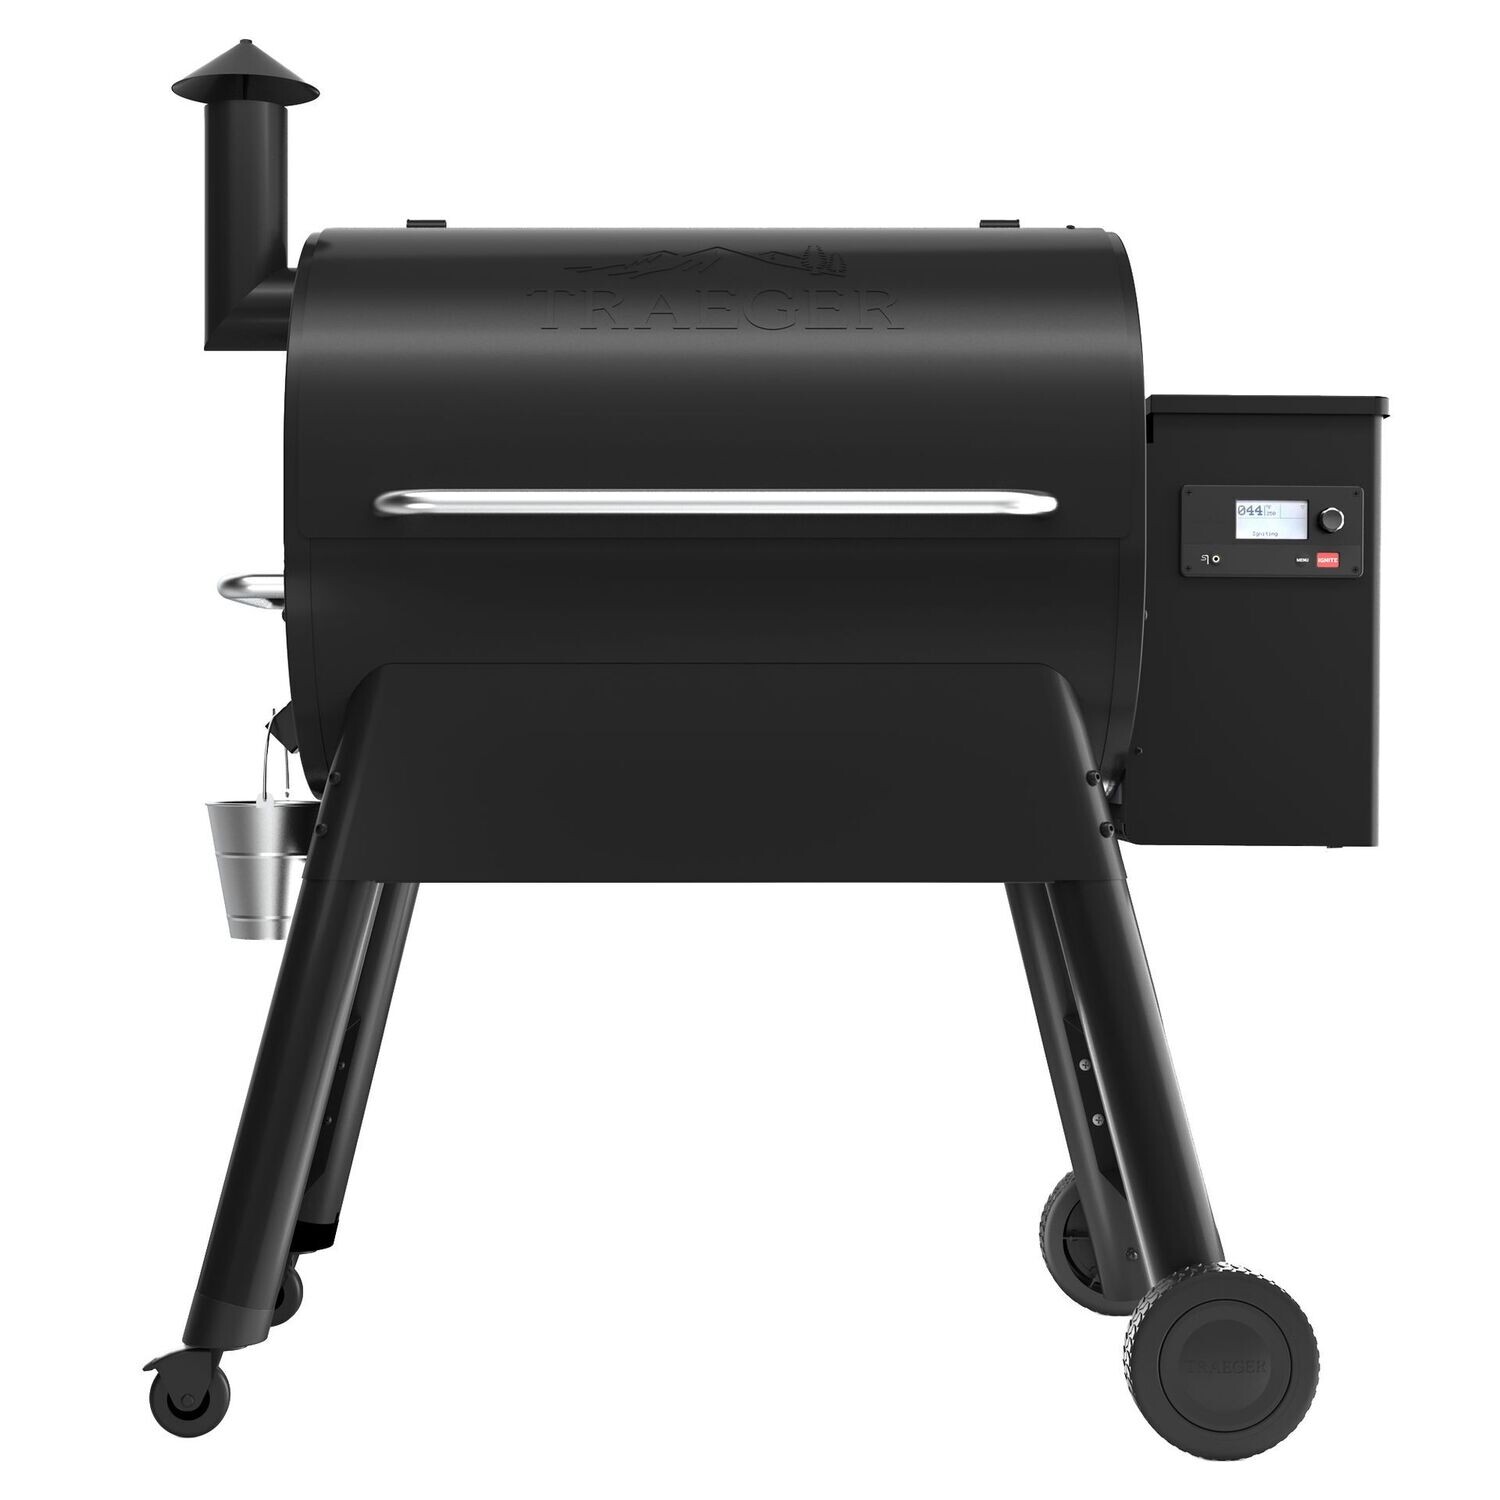 TRAEGER PRO 780 PELLET GRILL (Includes Front Shelf & Cover) RRP £1374.97  PROMO £999.99